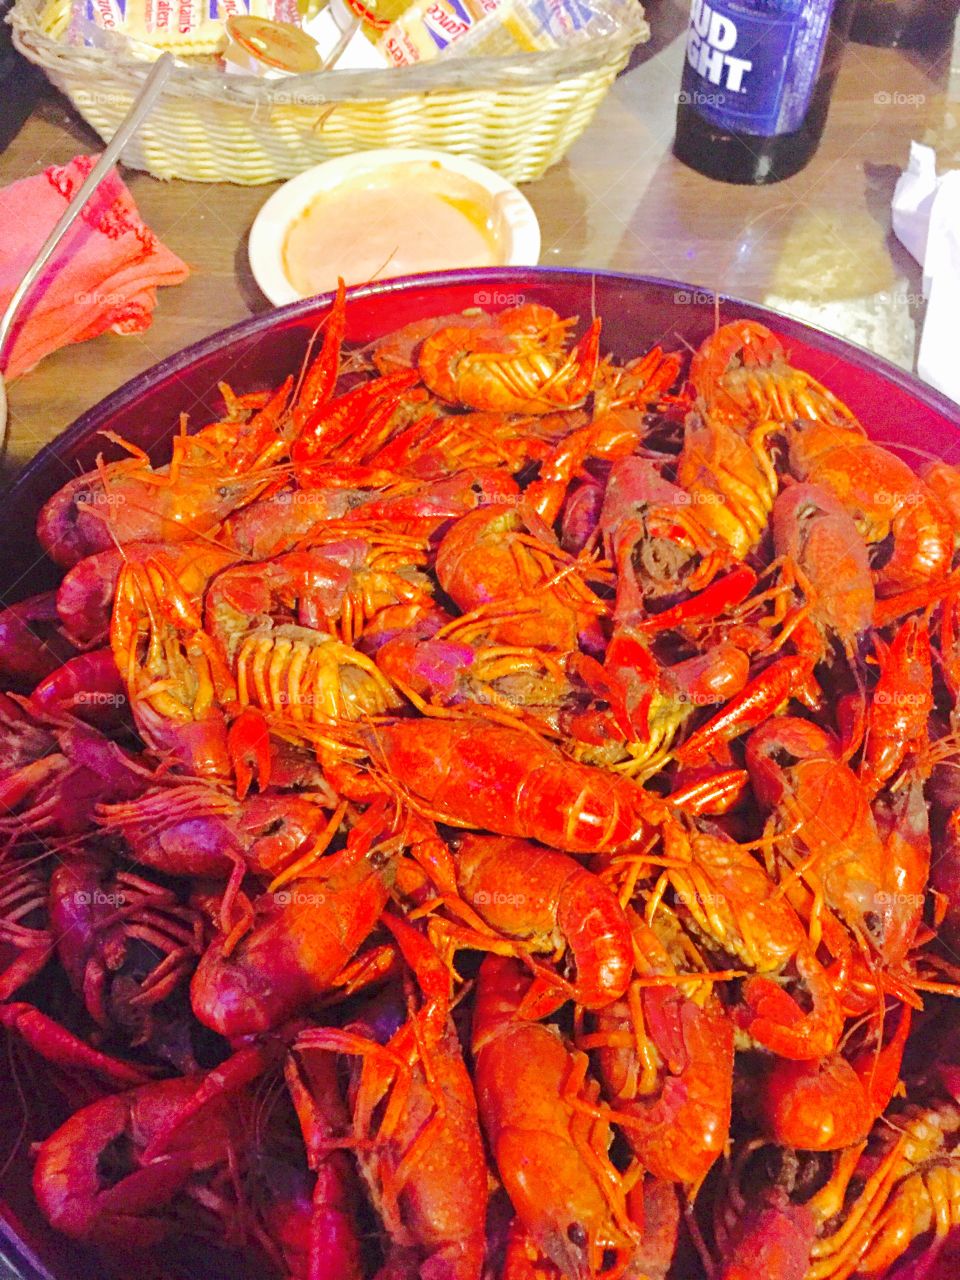 Crawfish is what's on the menu tonight 